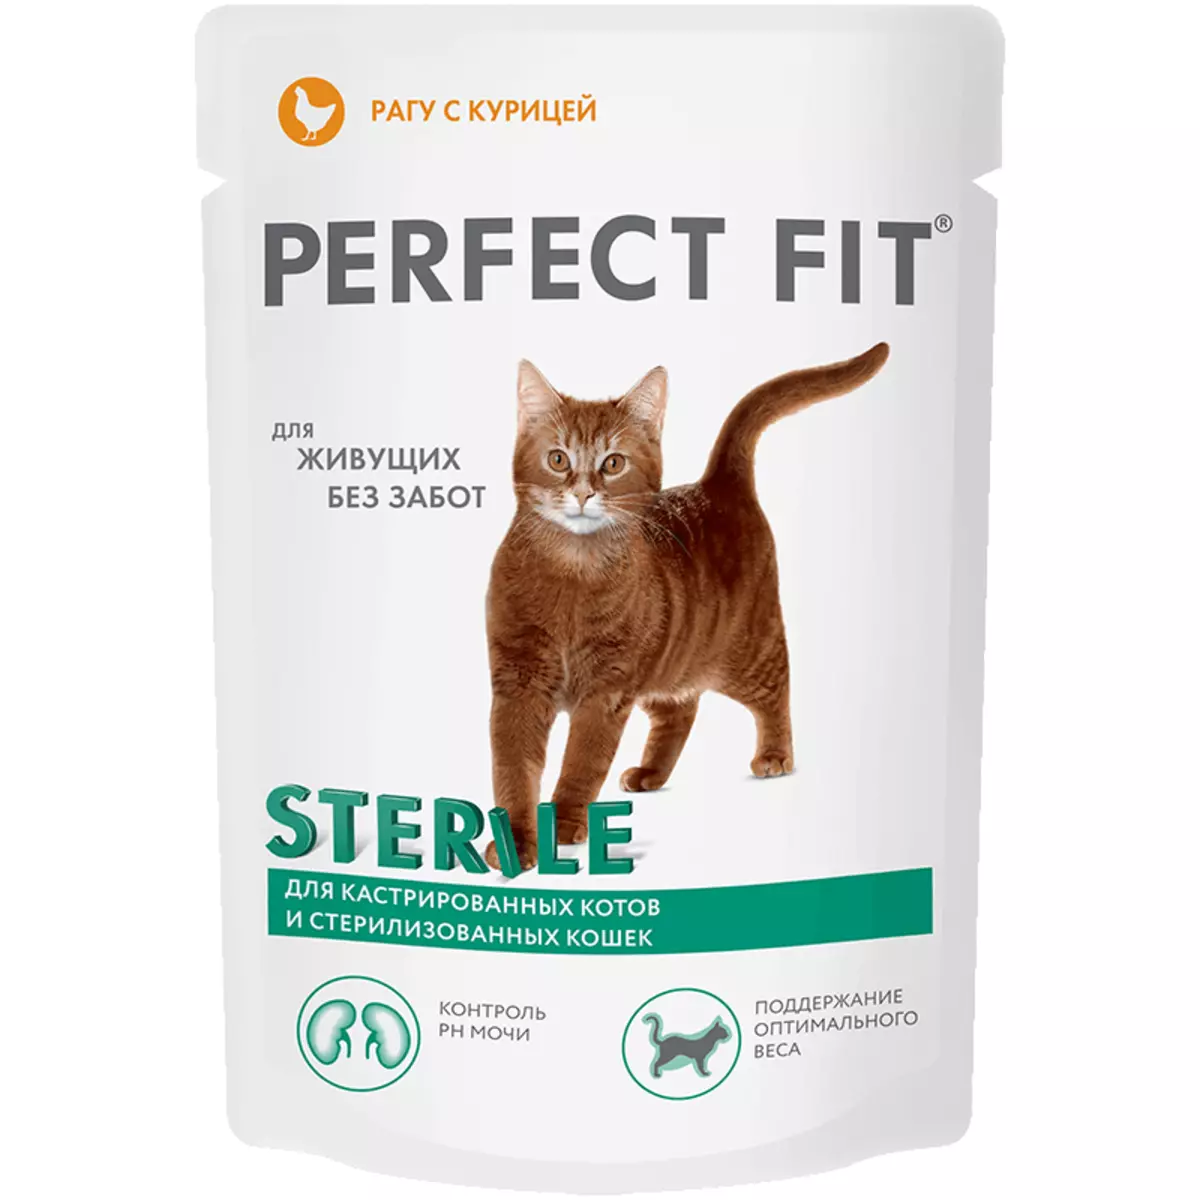 Wet feed for premium cats: rating of the best liquid feed for kittens, good soft feline food 11830_22